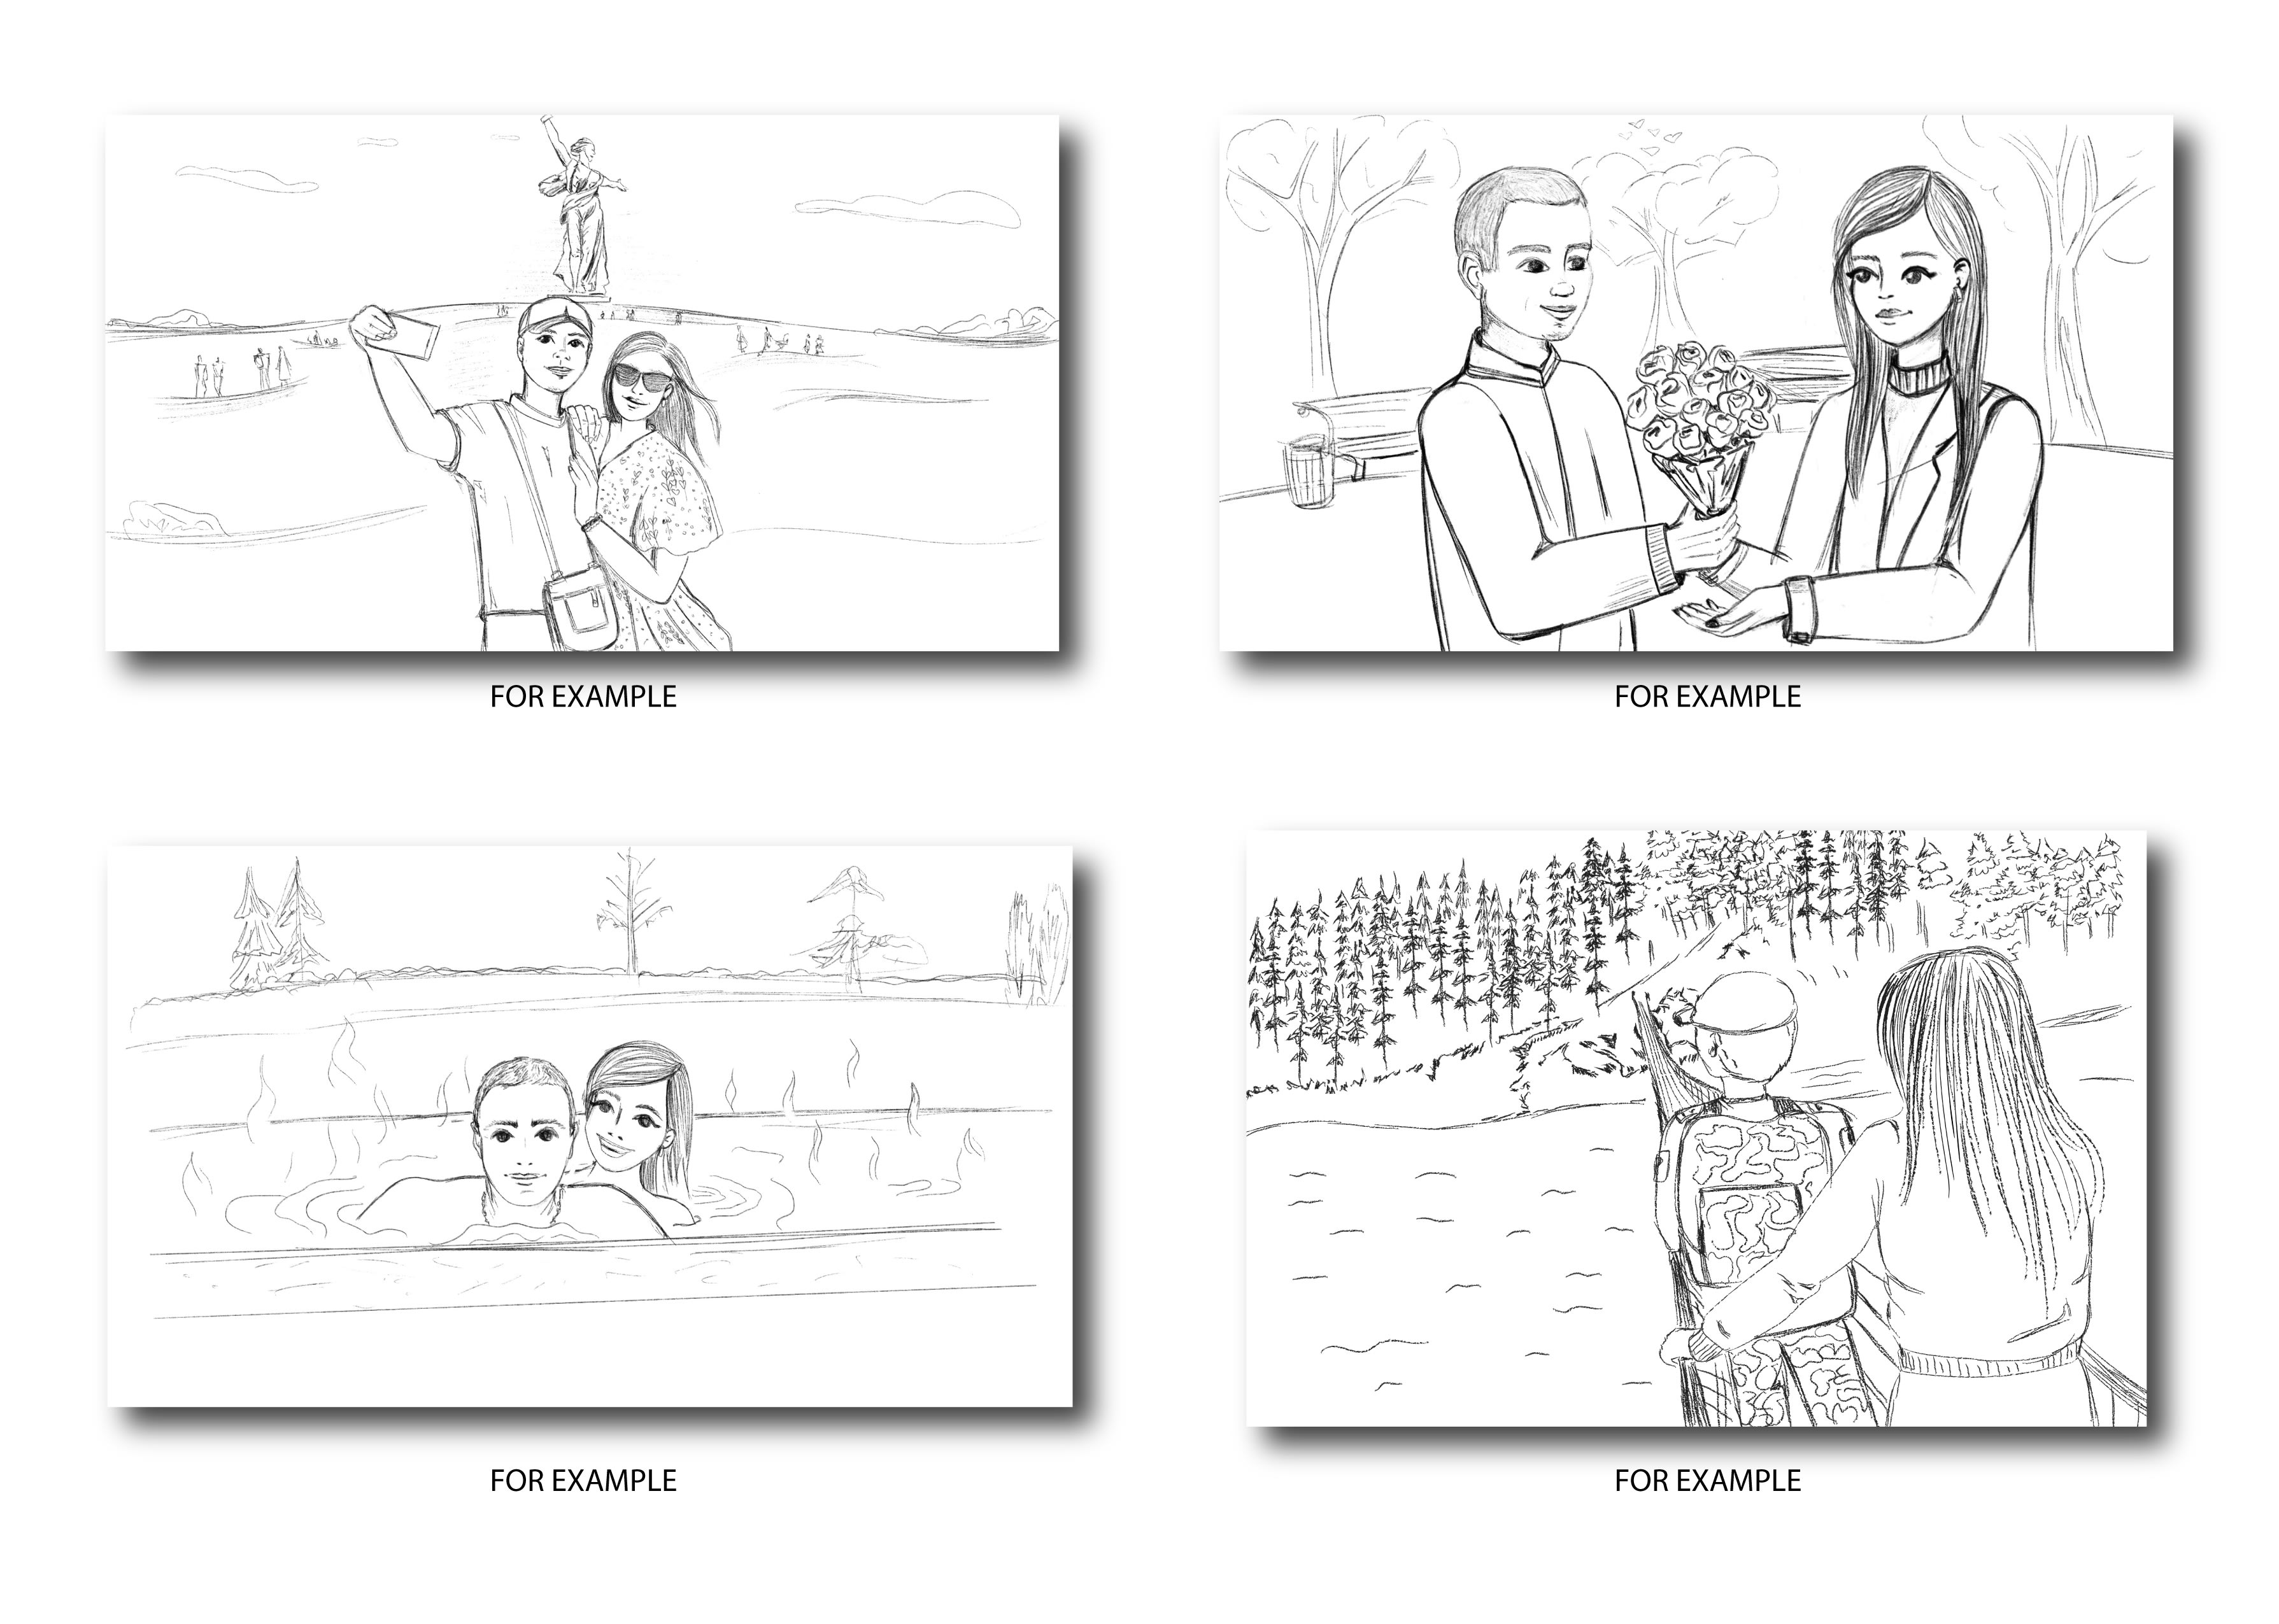 Some Story Sketch Examples